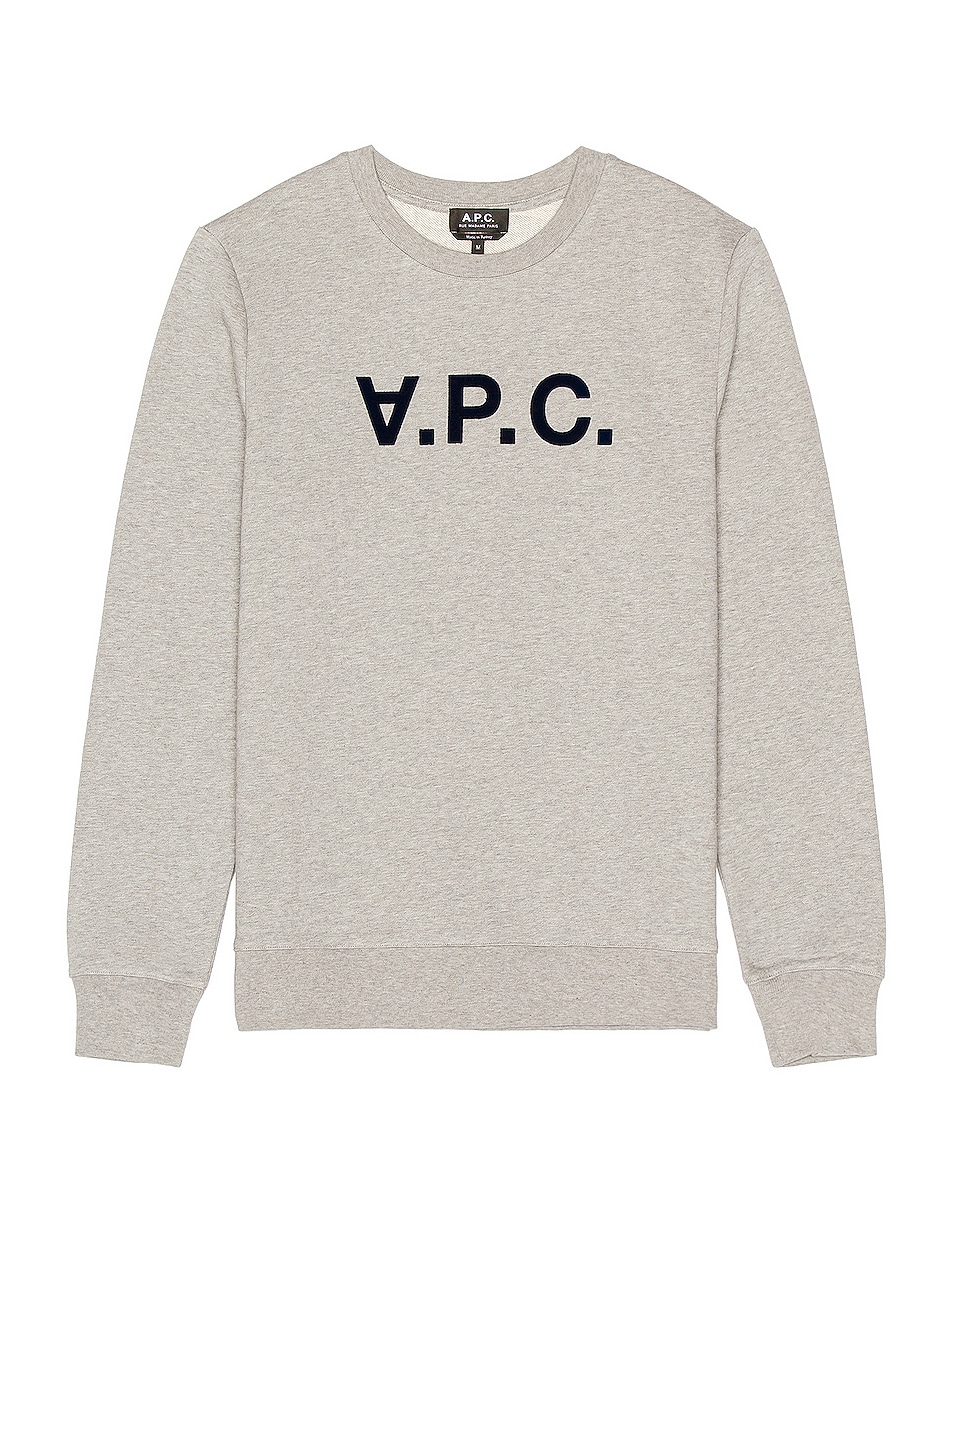 Image 1 of A.P.C. VPC Sweater in Heathered Grey